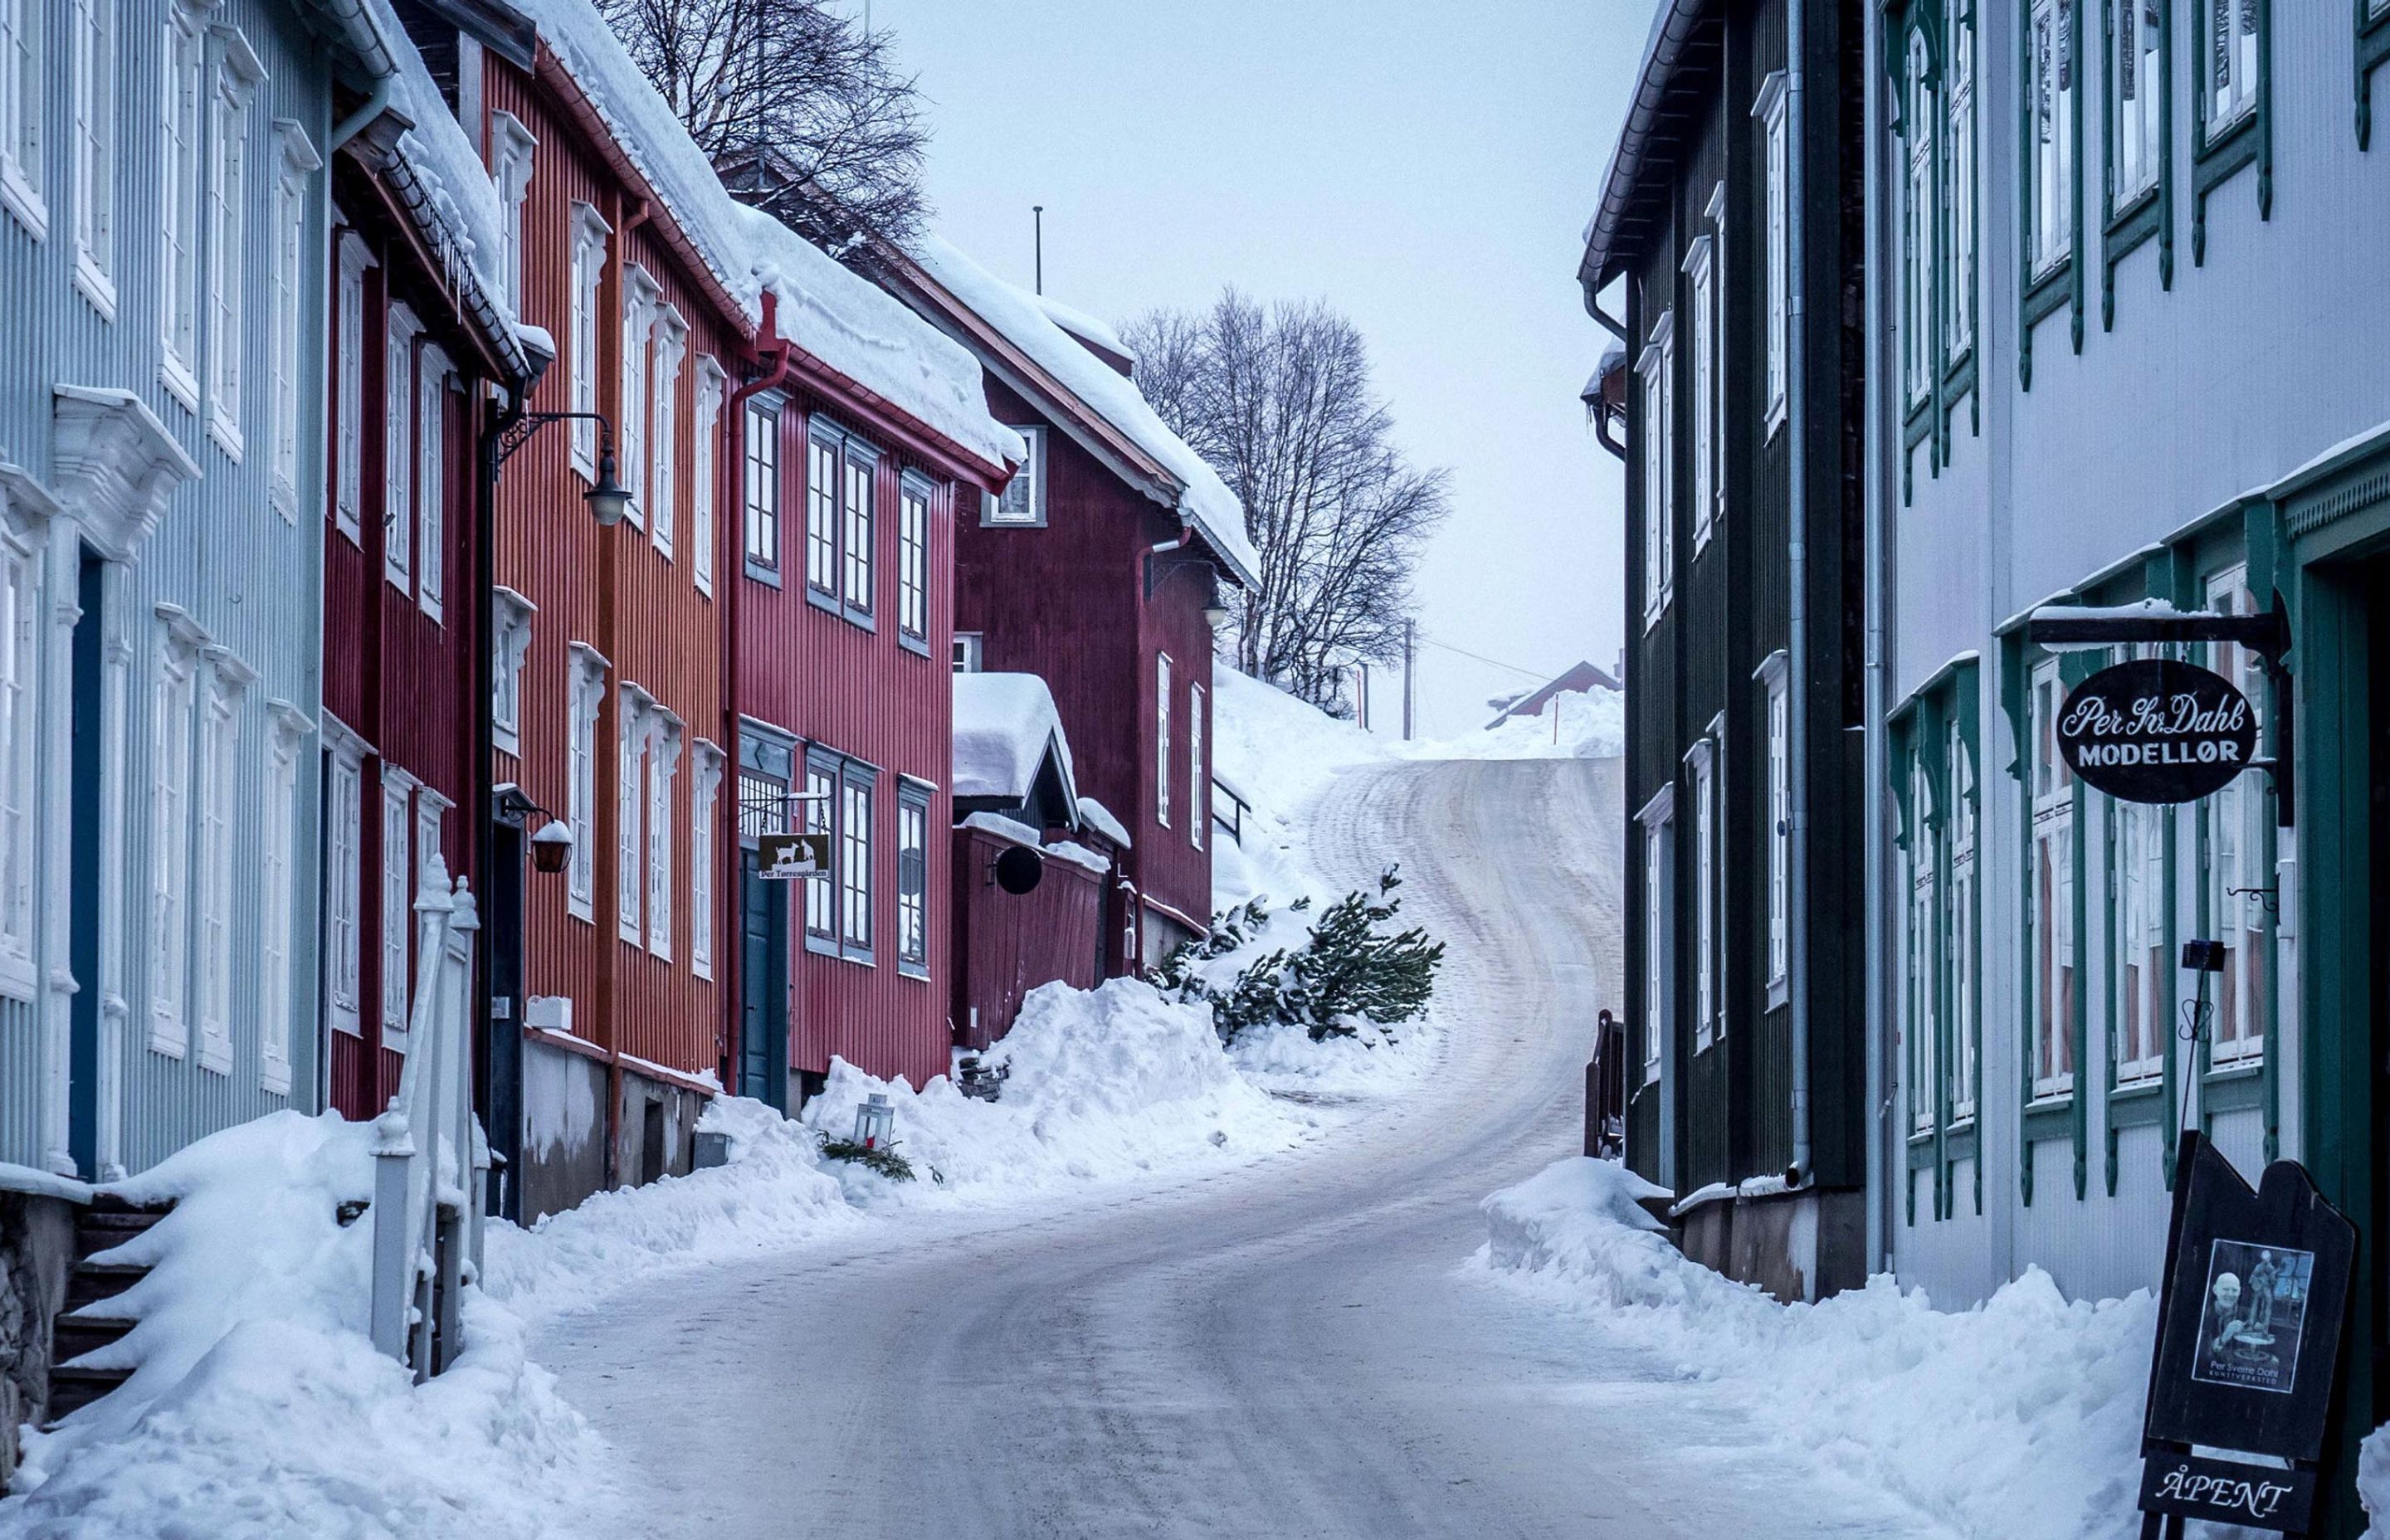 And finally, A snowy street in Røros, the home of HÅG, and one of our main production hubs in the heart of Norway